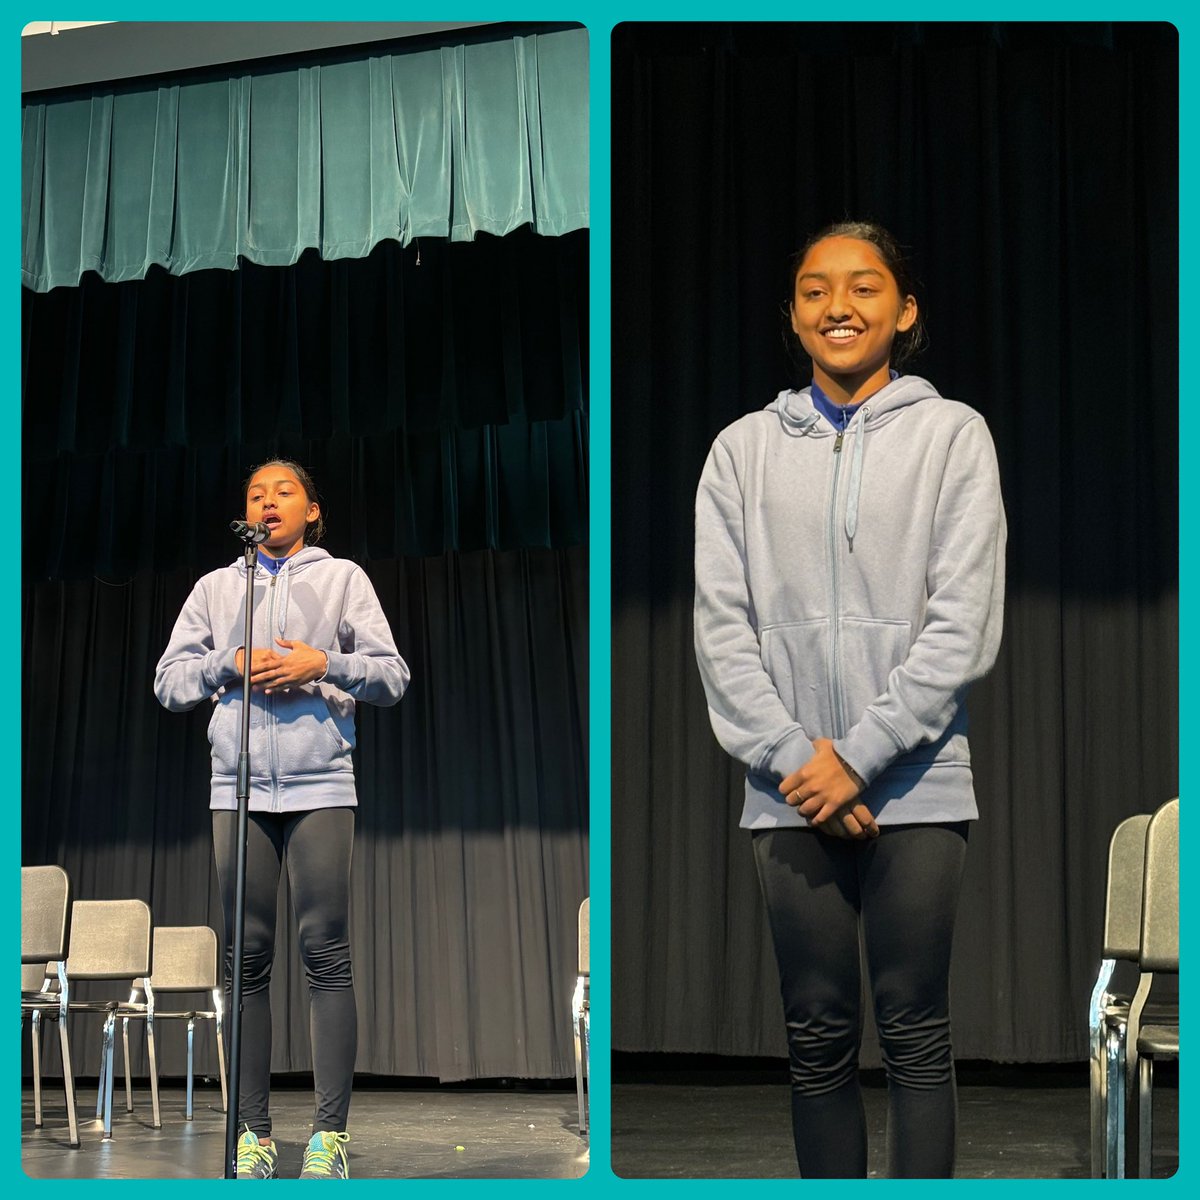 Join me in congratulating -Jahnvi Patel! This Global Scholar was the overall winner for our Spelling Bee. Jahnvi- we are cheering for you as you prepare to represent our school! #veryproud